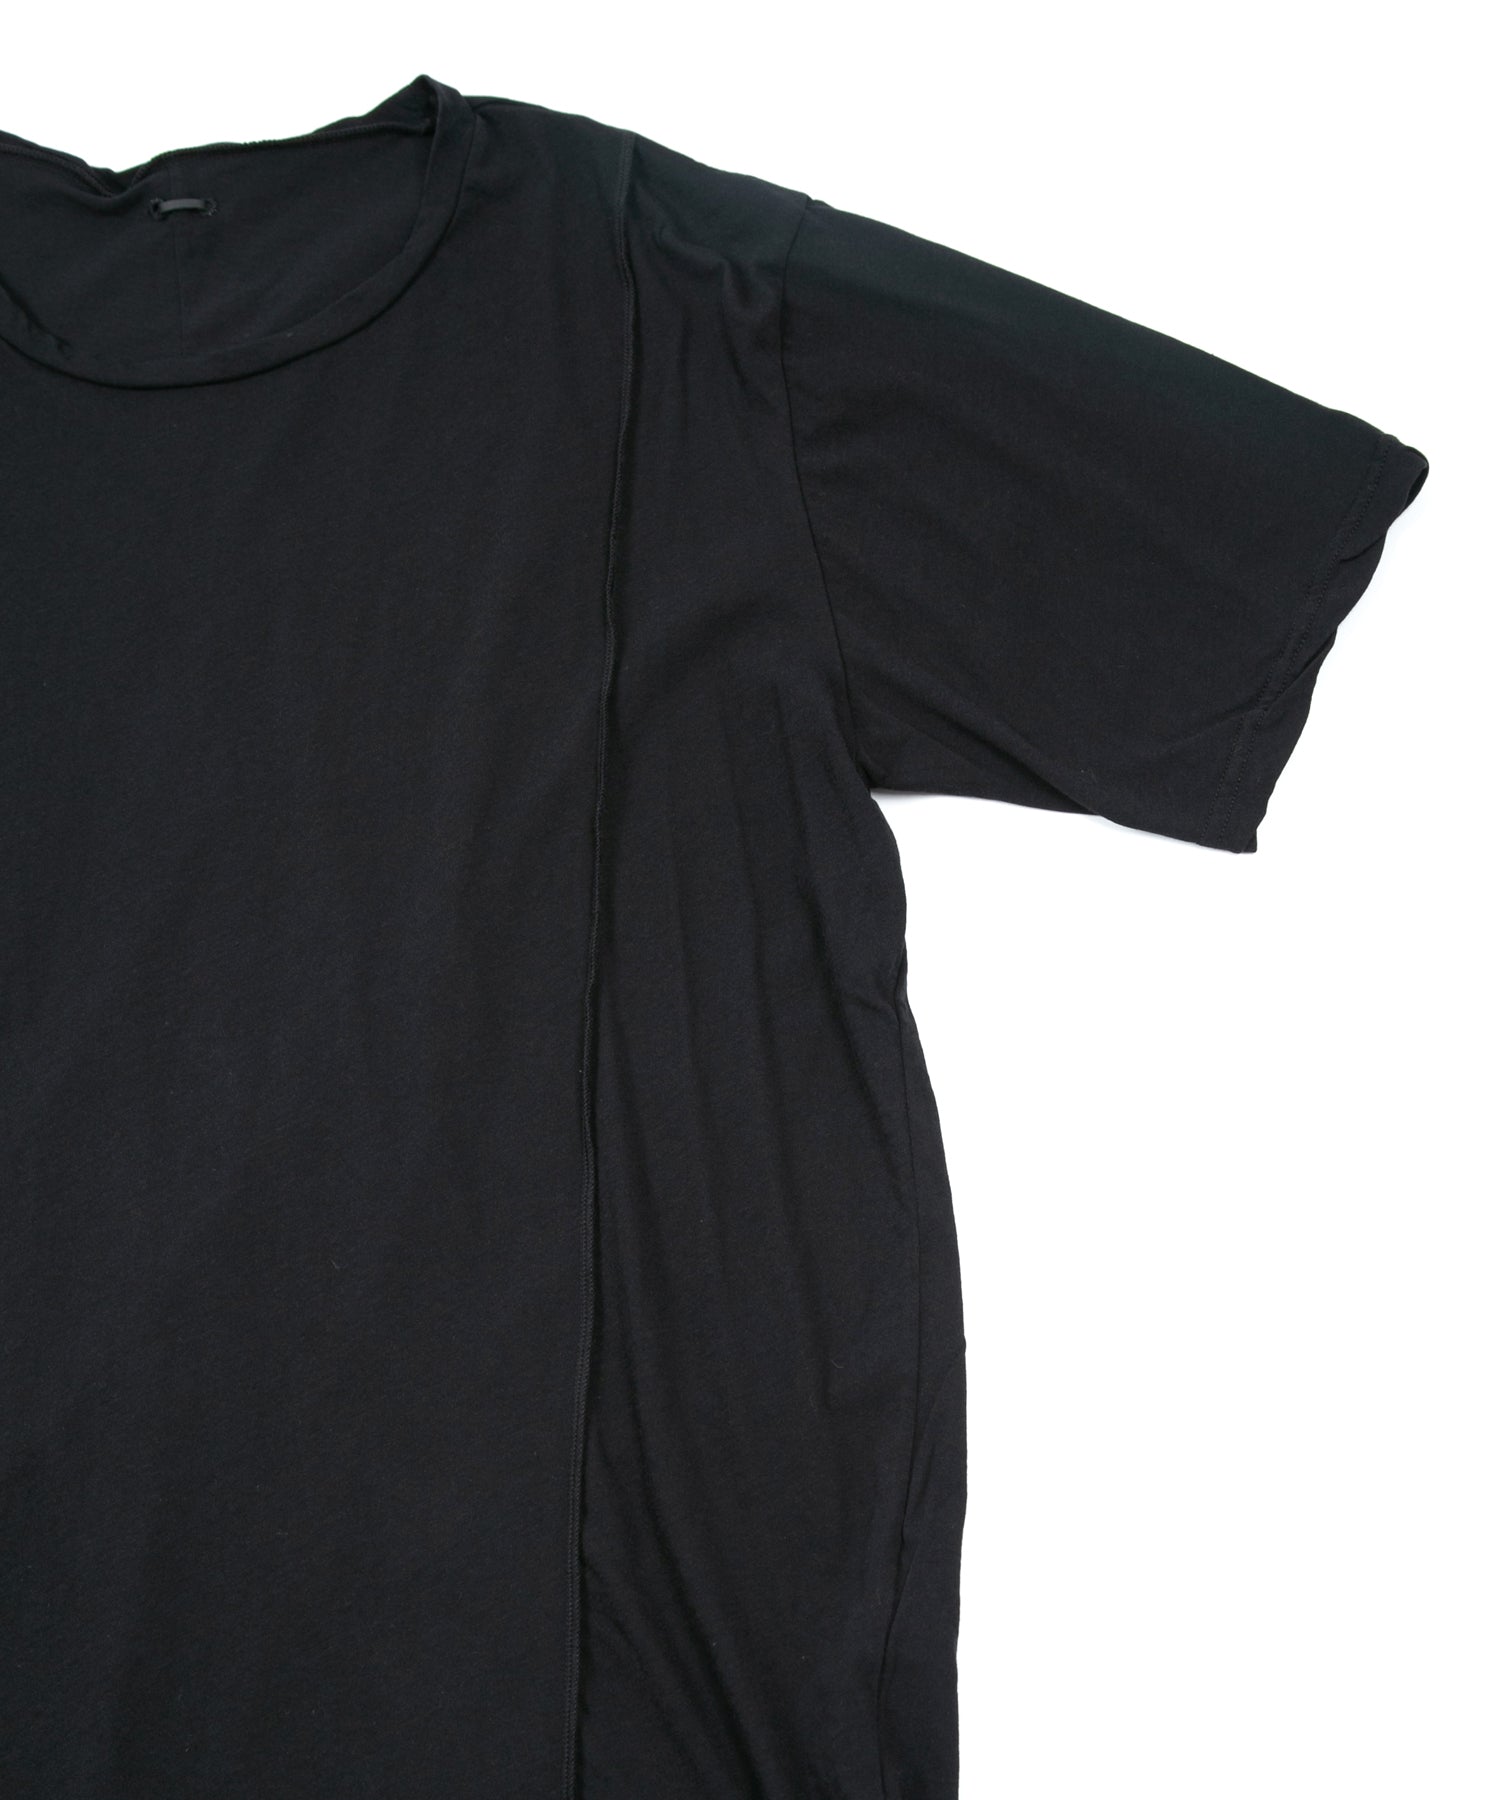 Load image into Gallery viewer, Hard Twist Cotton Oversize Crew Neck T-shirt - BLACK